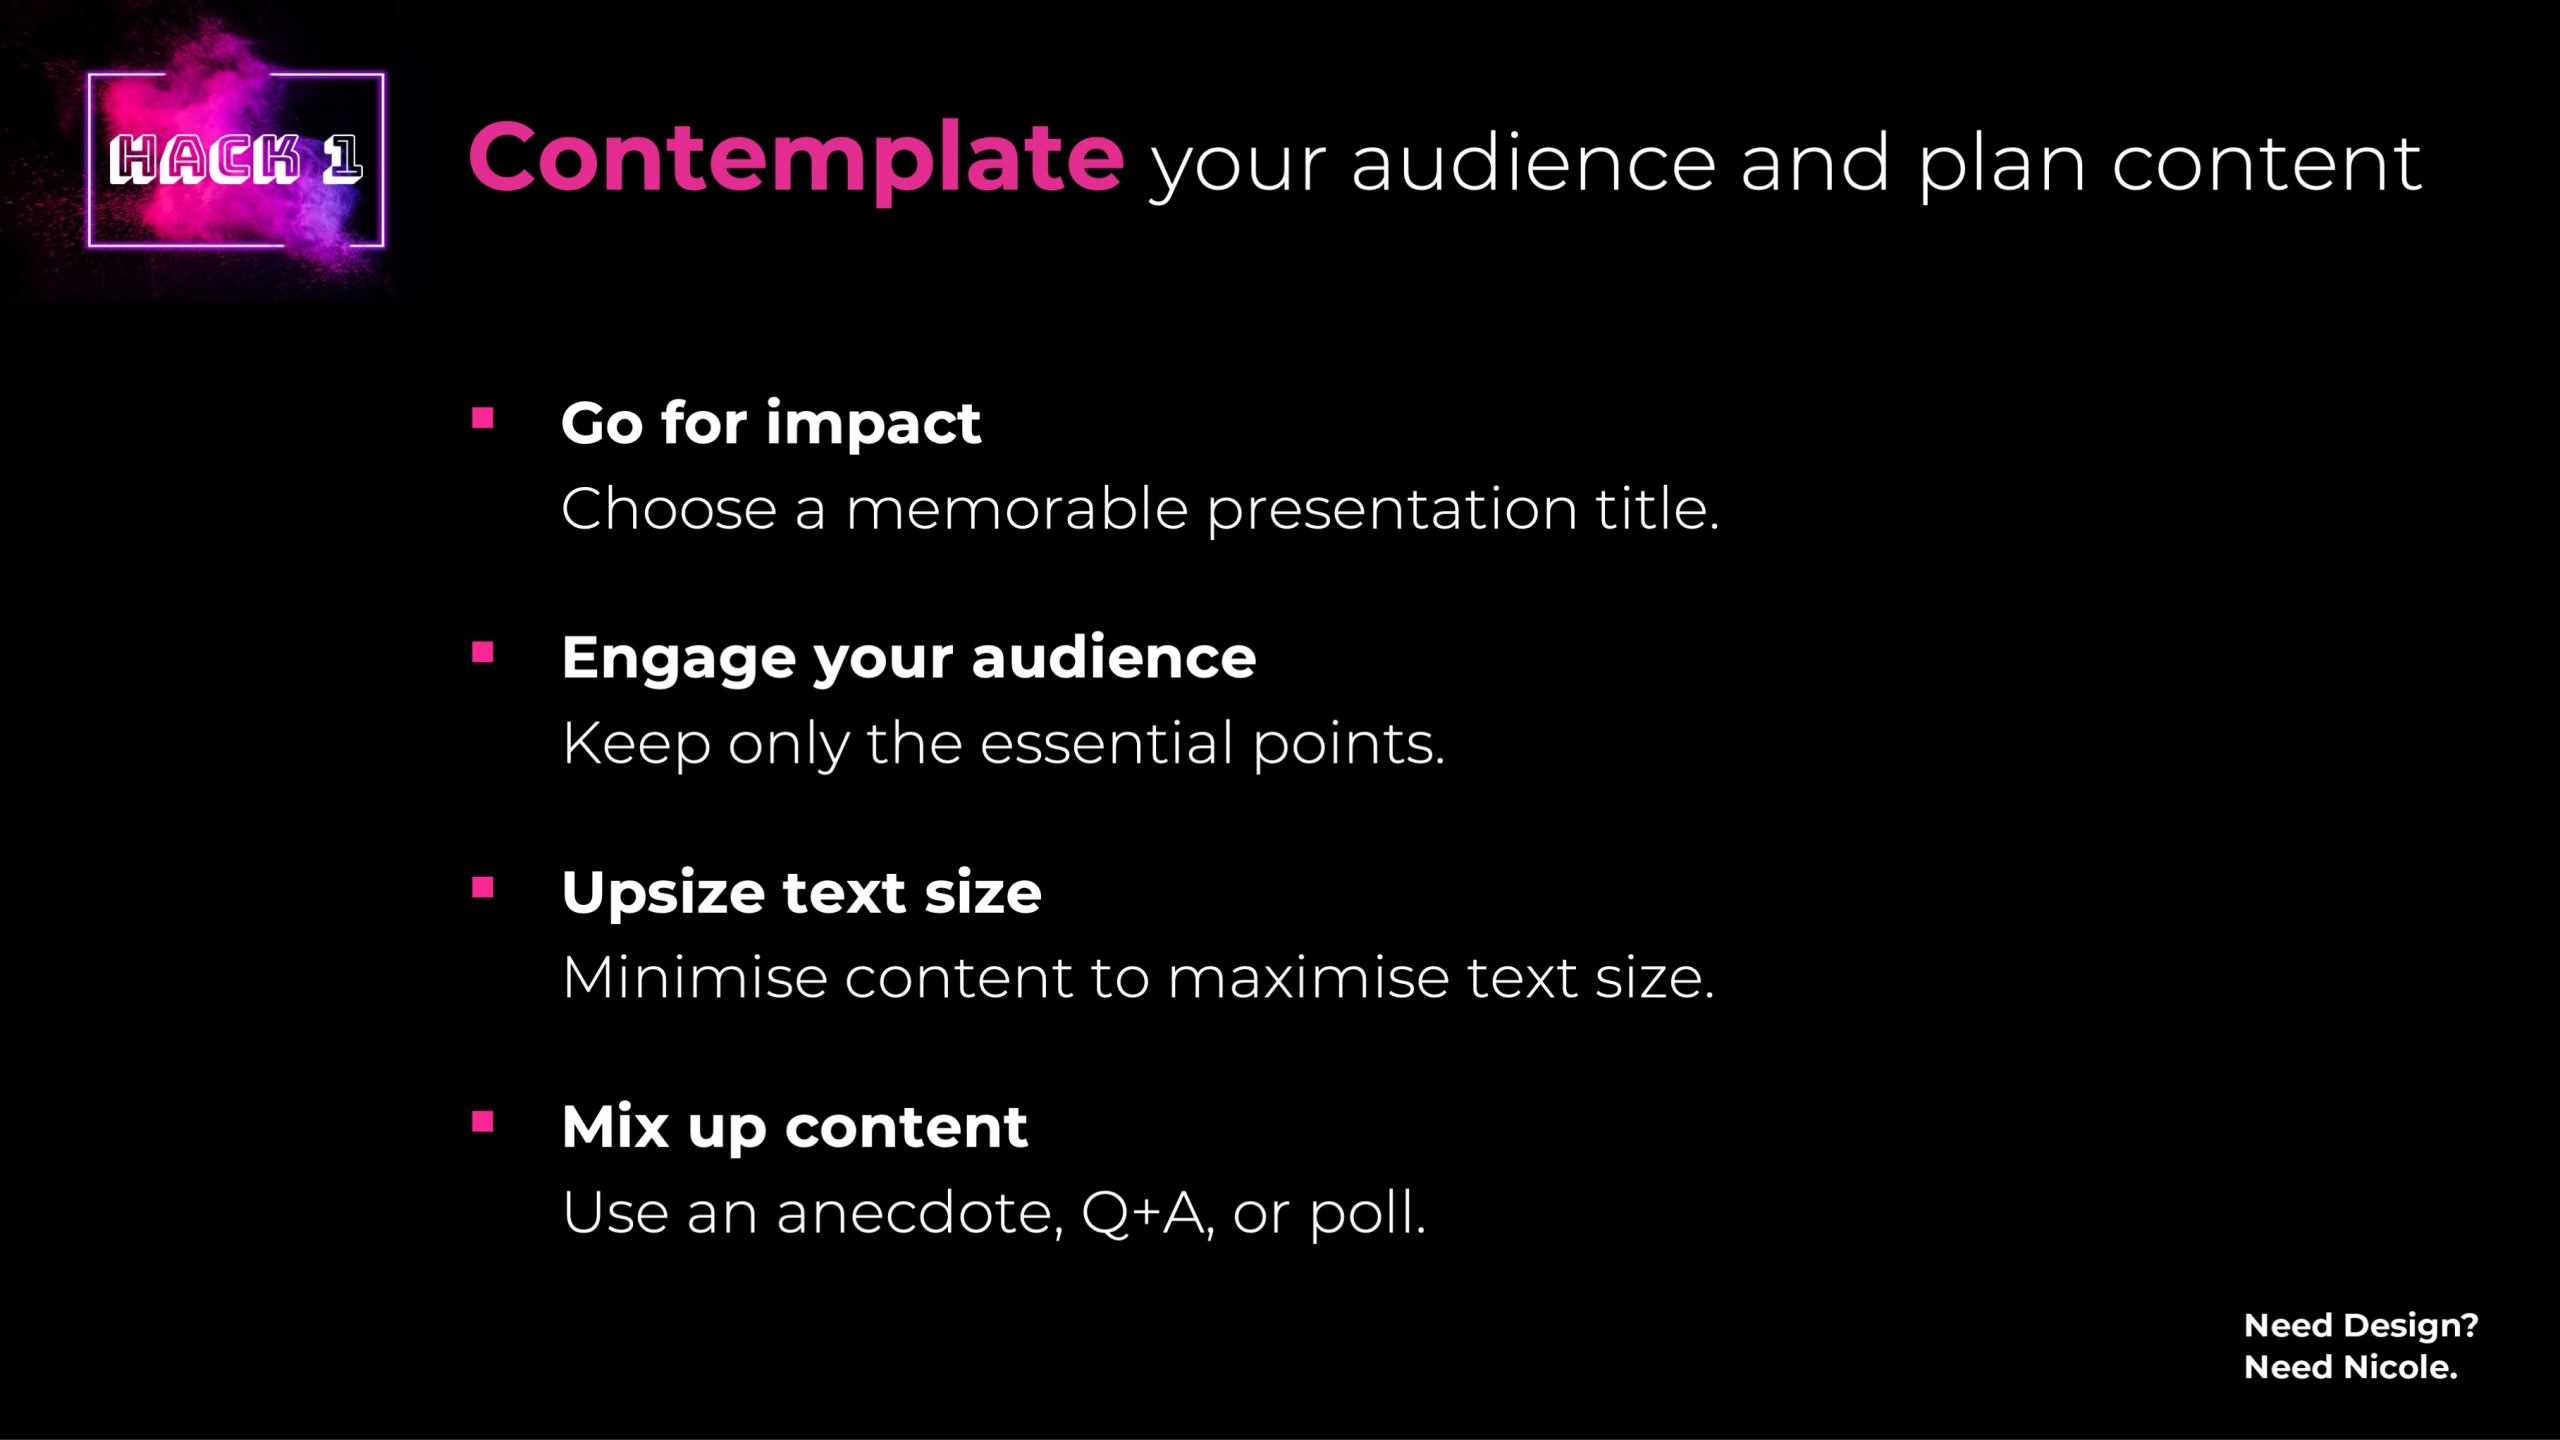 Contemplate your audience and plan content 1. Go for impact Choose a memorable presentation title. 2. Engage your audience Keep only the essential points. 3. Upsize text size Minimise content to maximise text size. 4. Mix up content Use an anecdote, Q+A, or poll.